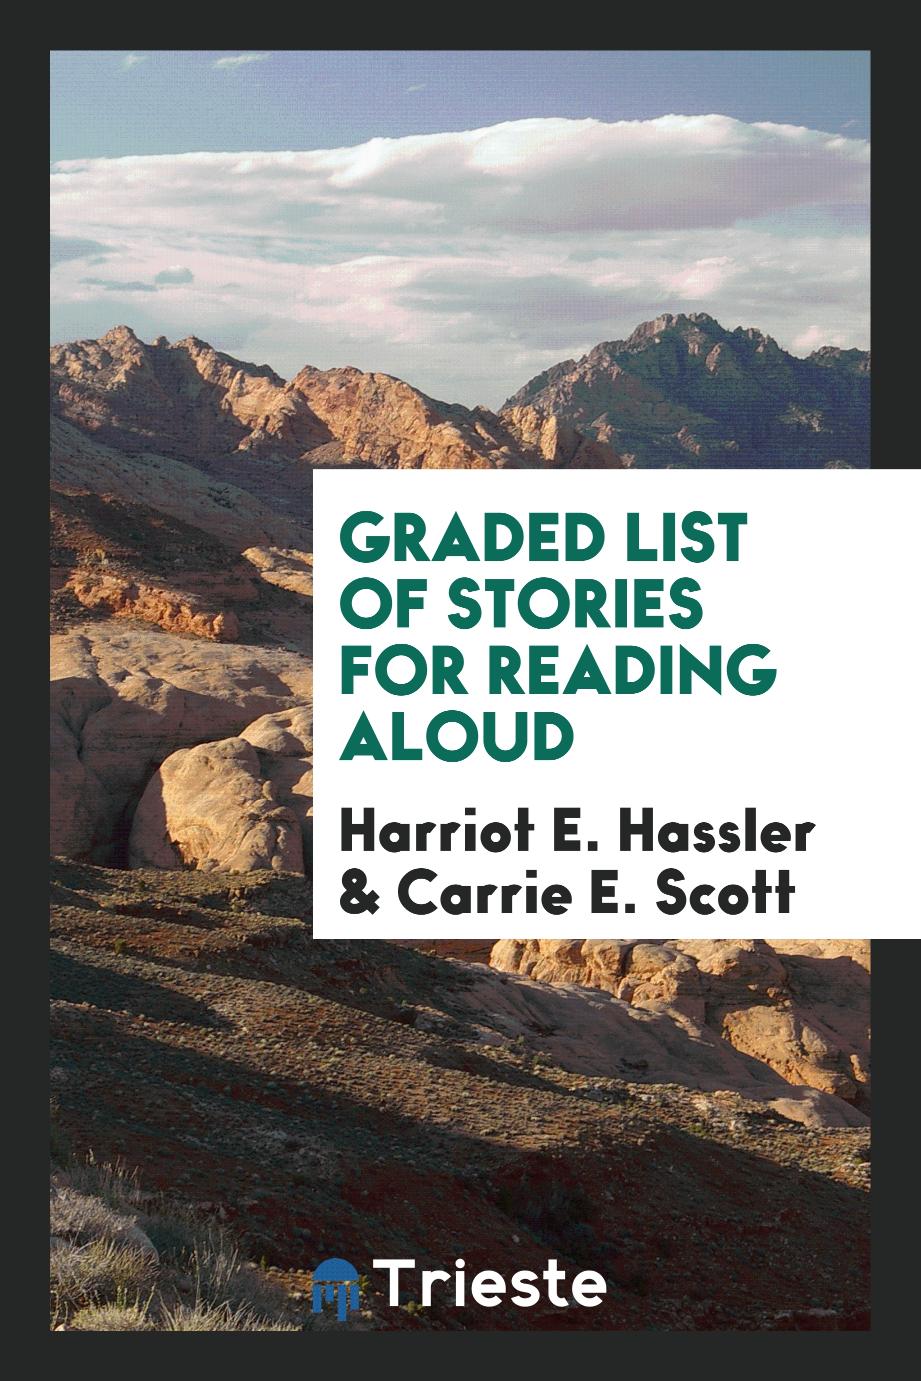 Graded List of Stories for Reading Aloud